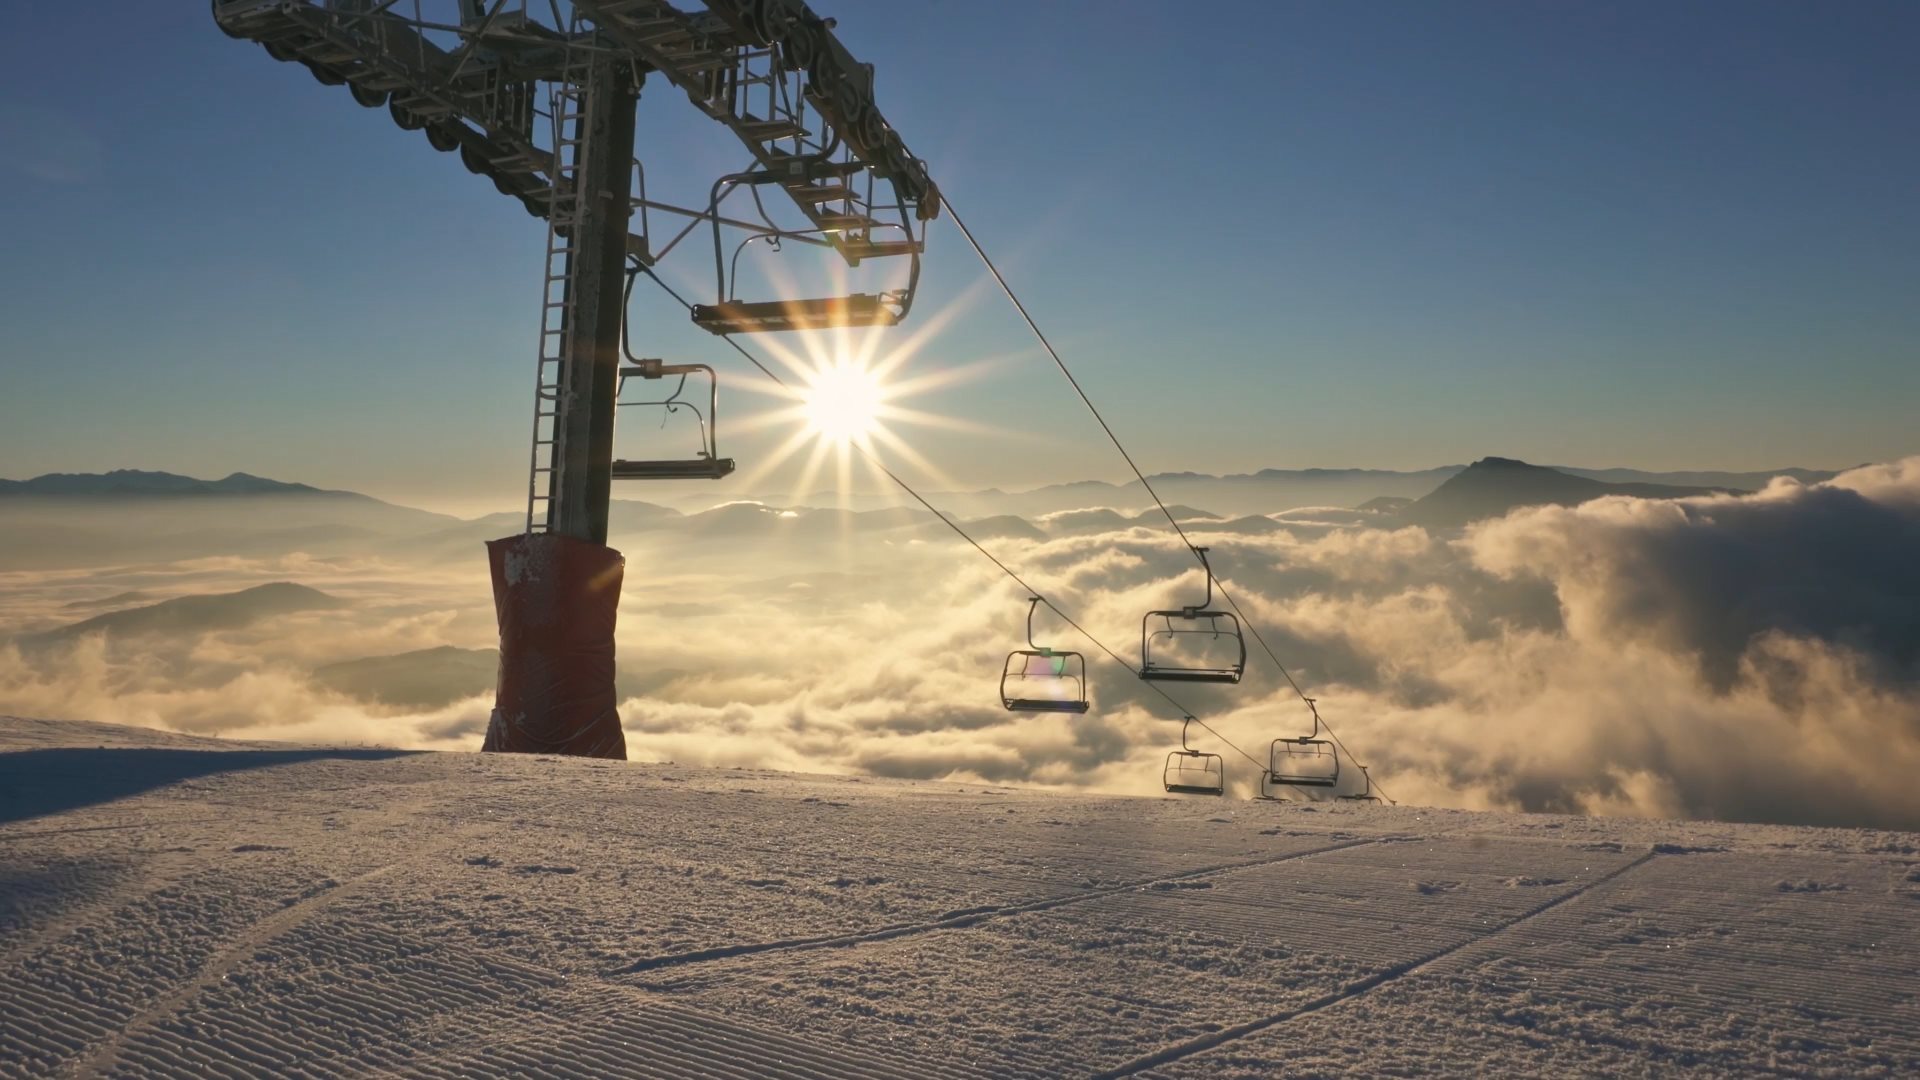 Video of chair lift over the clouds